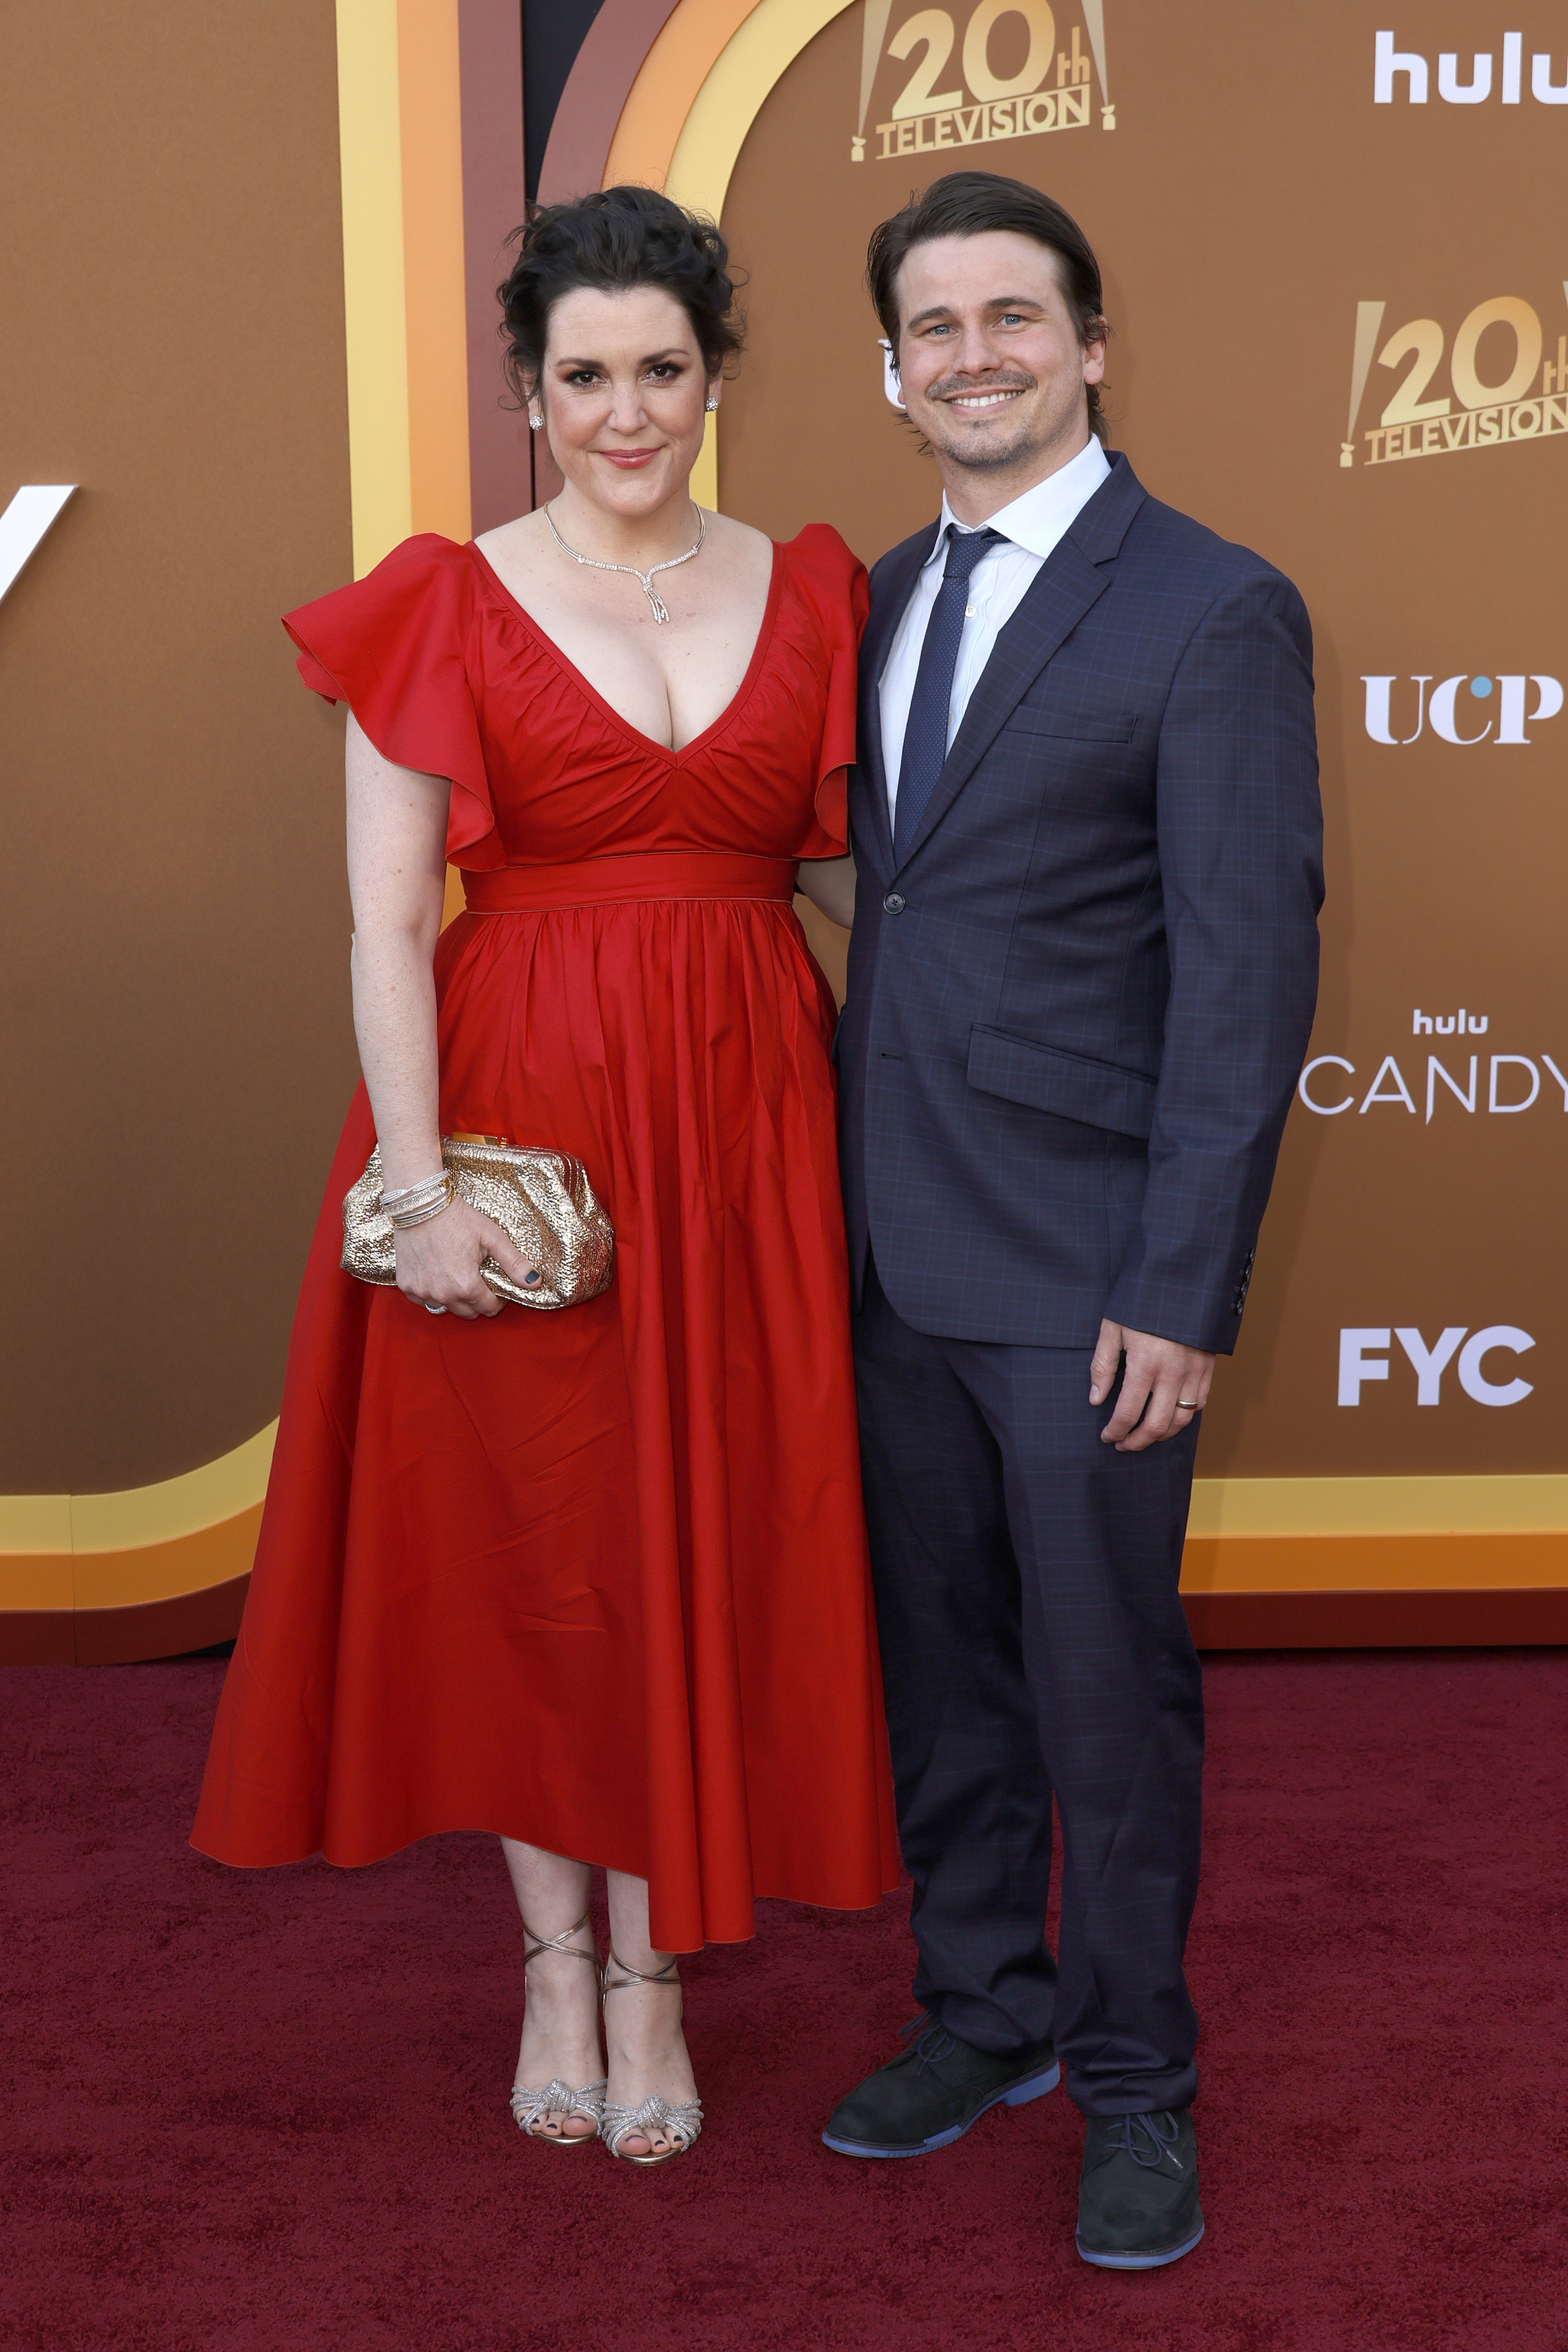 Melanie Lynskey and Jason Ritter attend the Los Angeles Premiere FYC Event for Hulu's "Candy" at El Capitan Theatre on May 09, 2022 in Los Angeles, California | Source: Getty Images